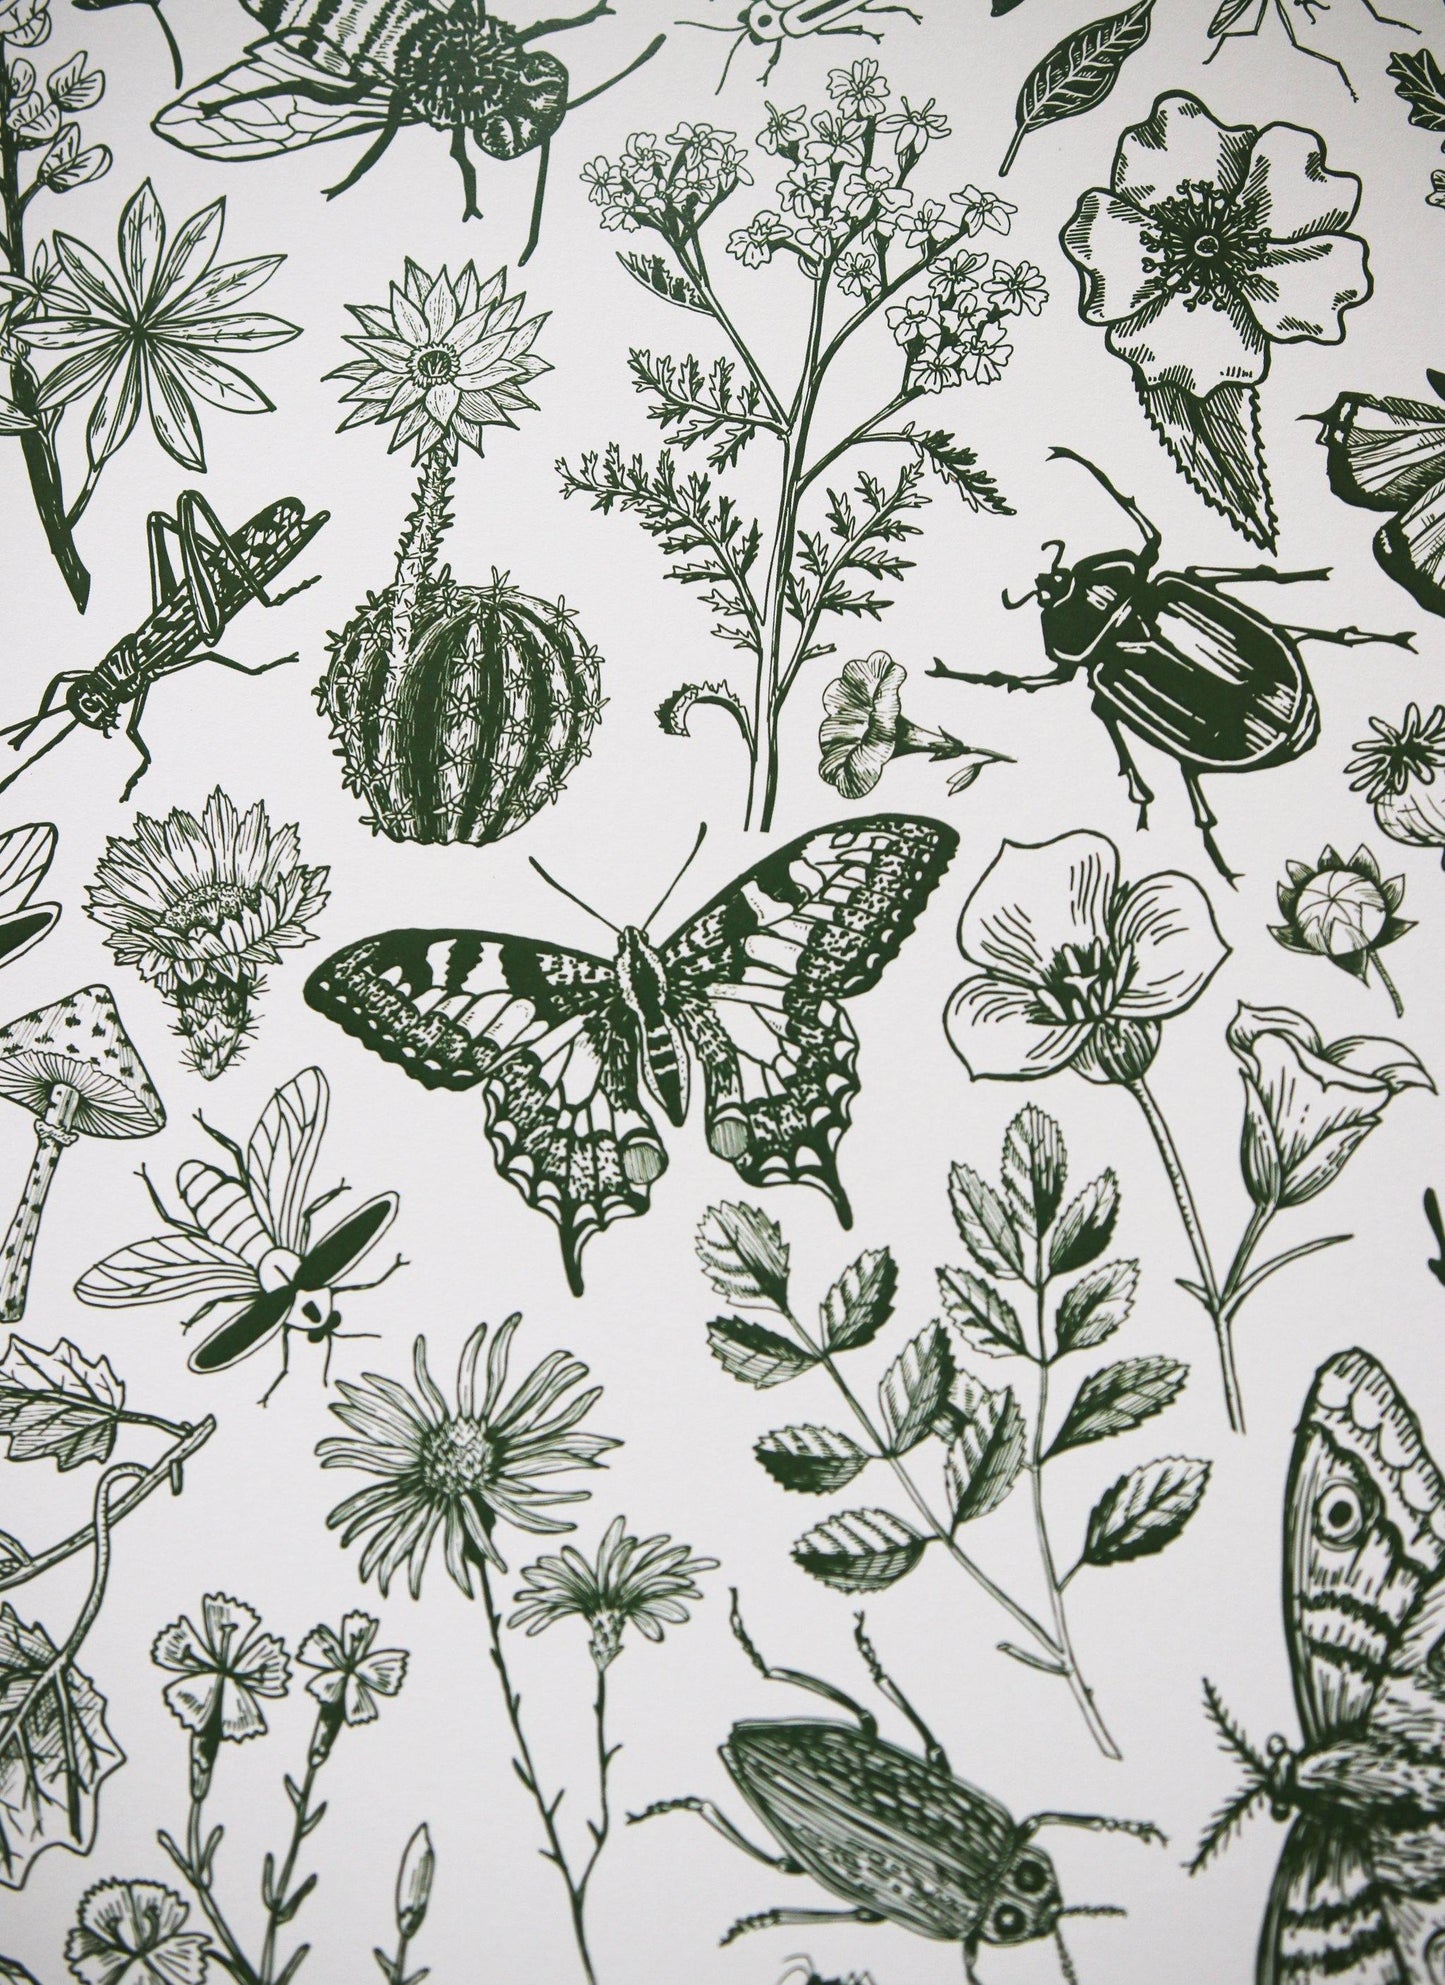 This wall art is the very best of the bug and floral botanical prints.